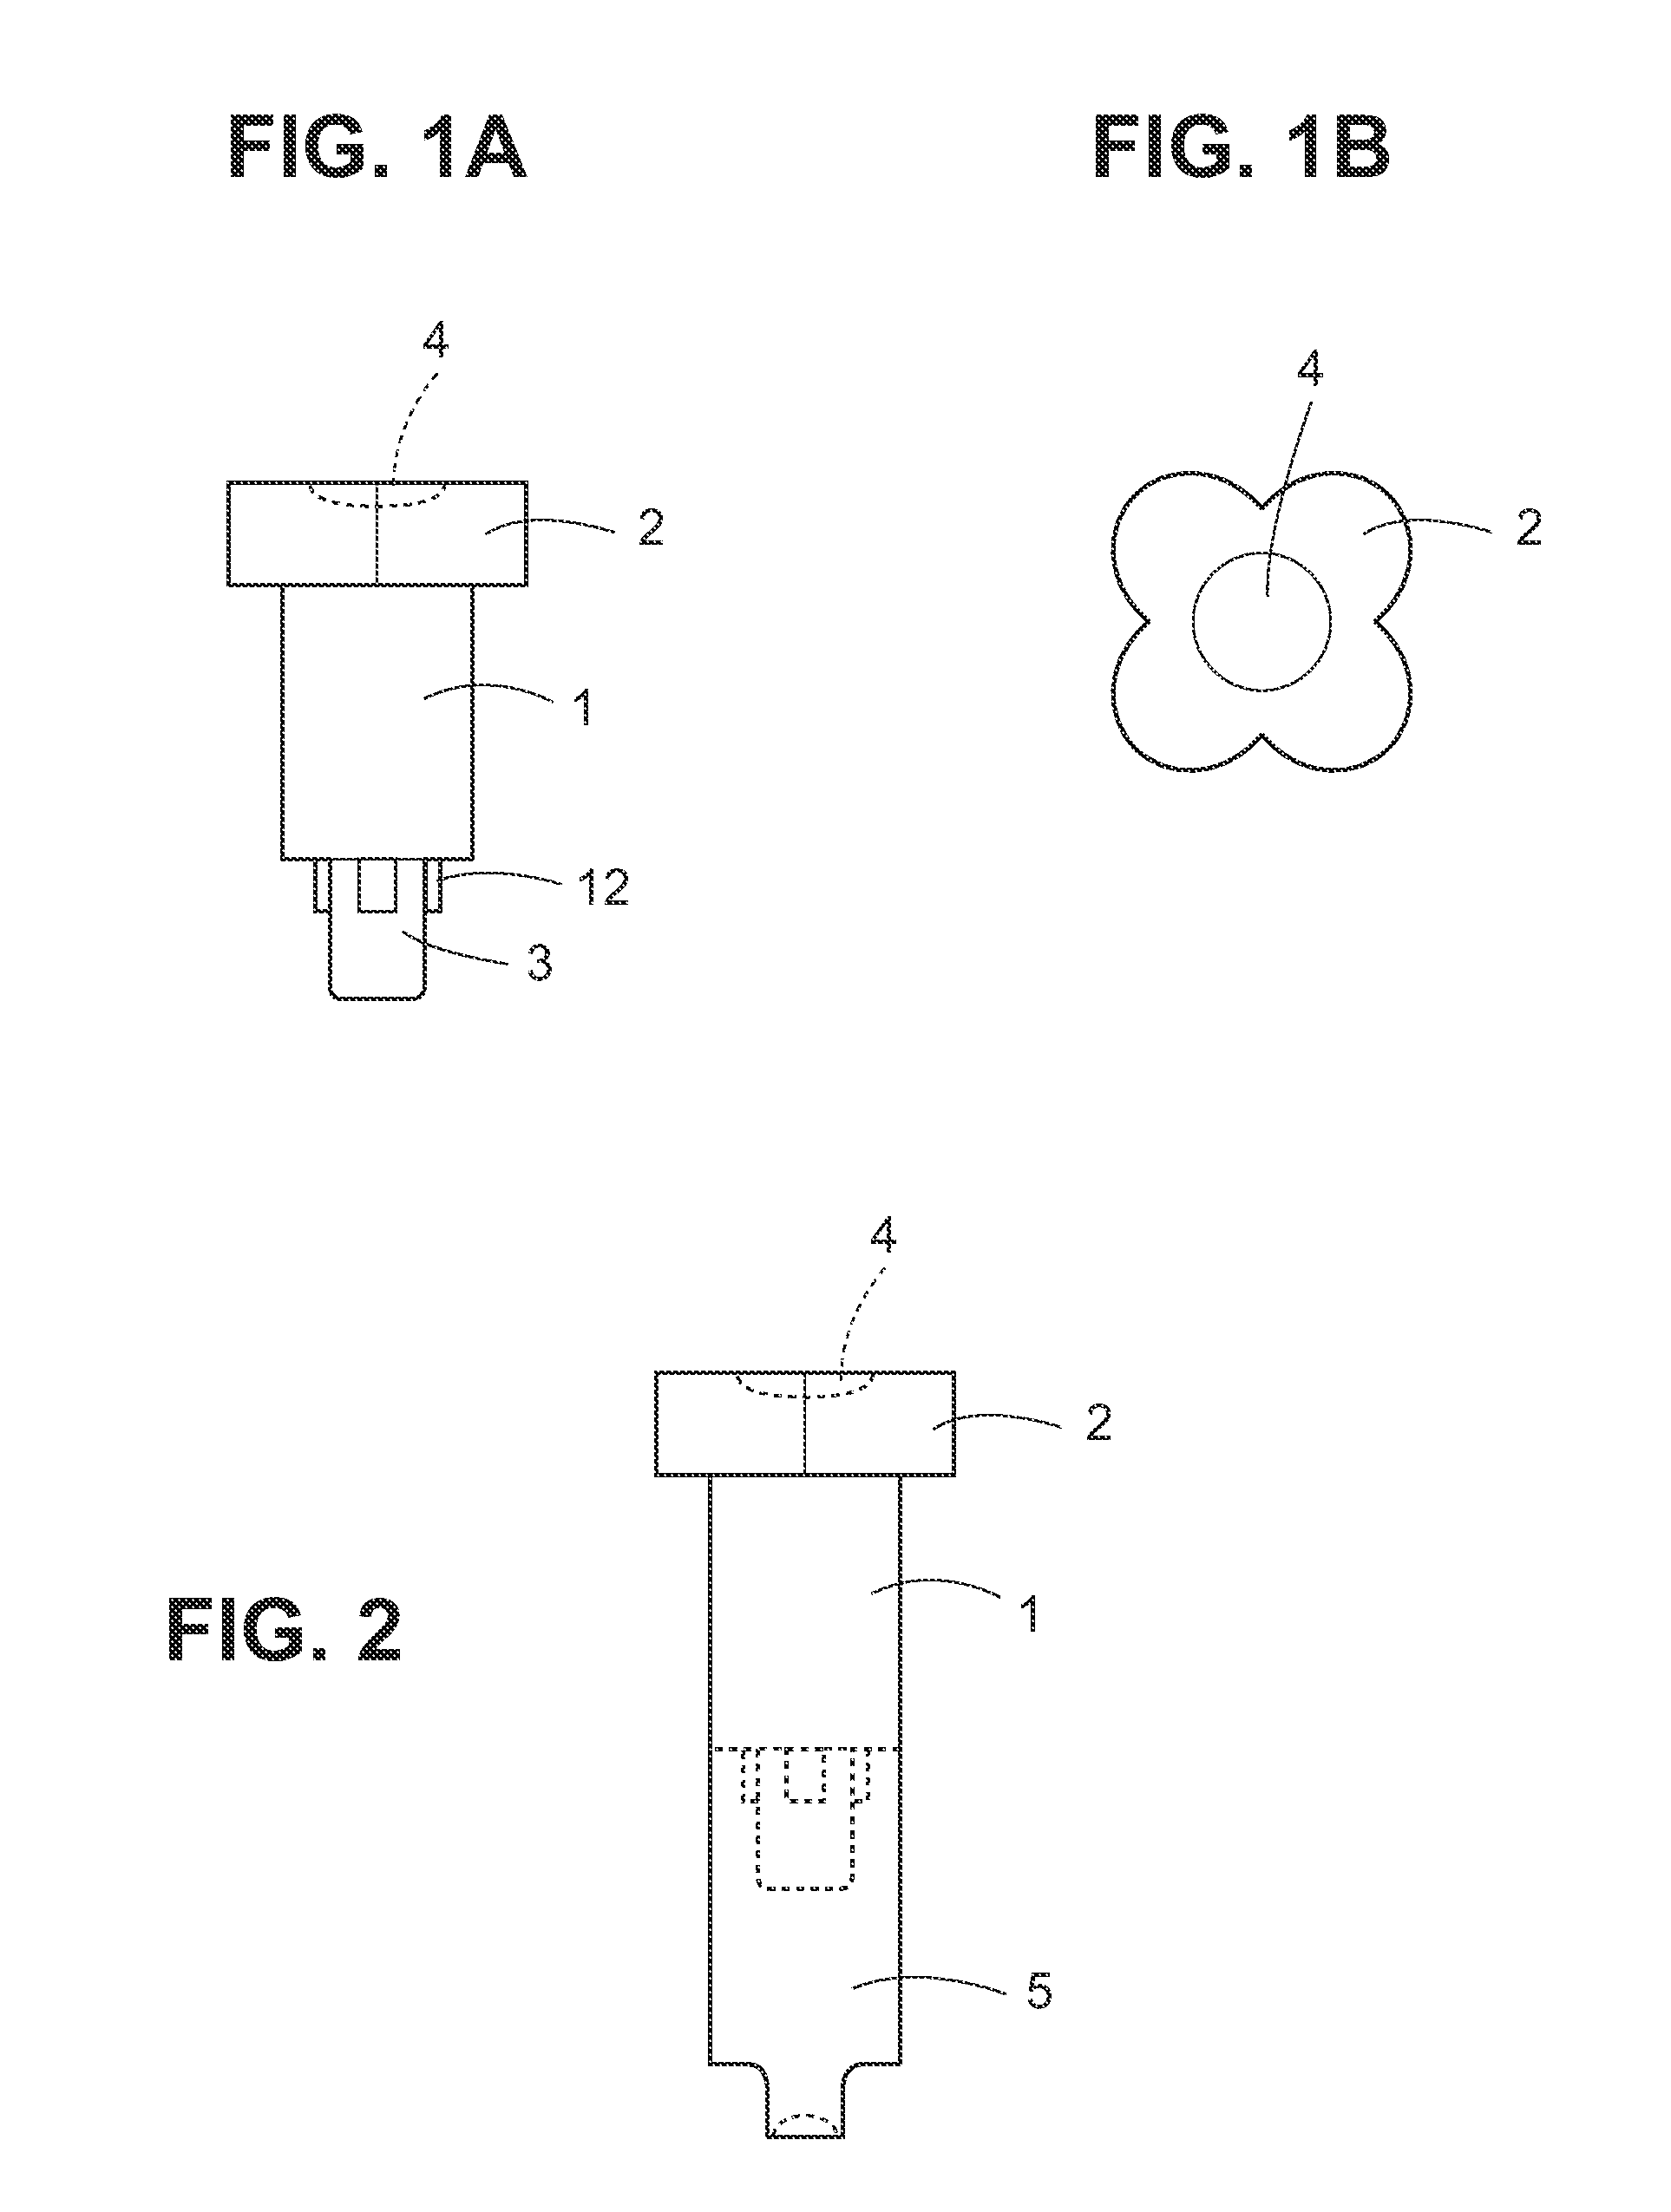 Device and Method for Capturing Dental Records